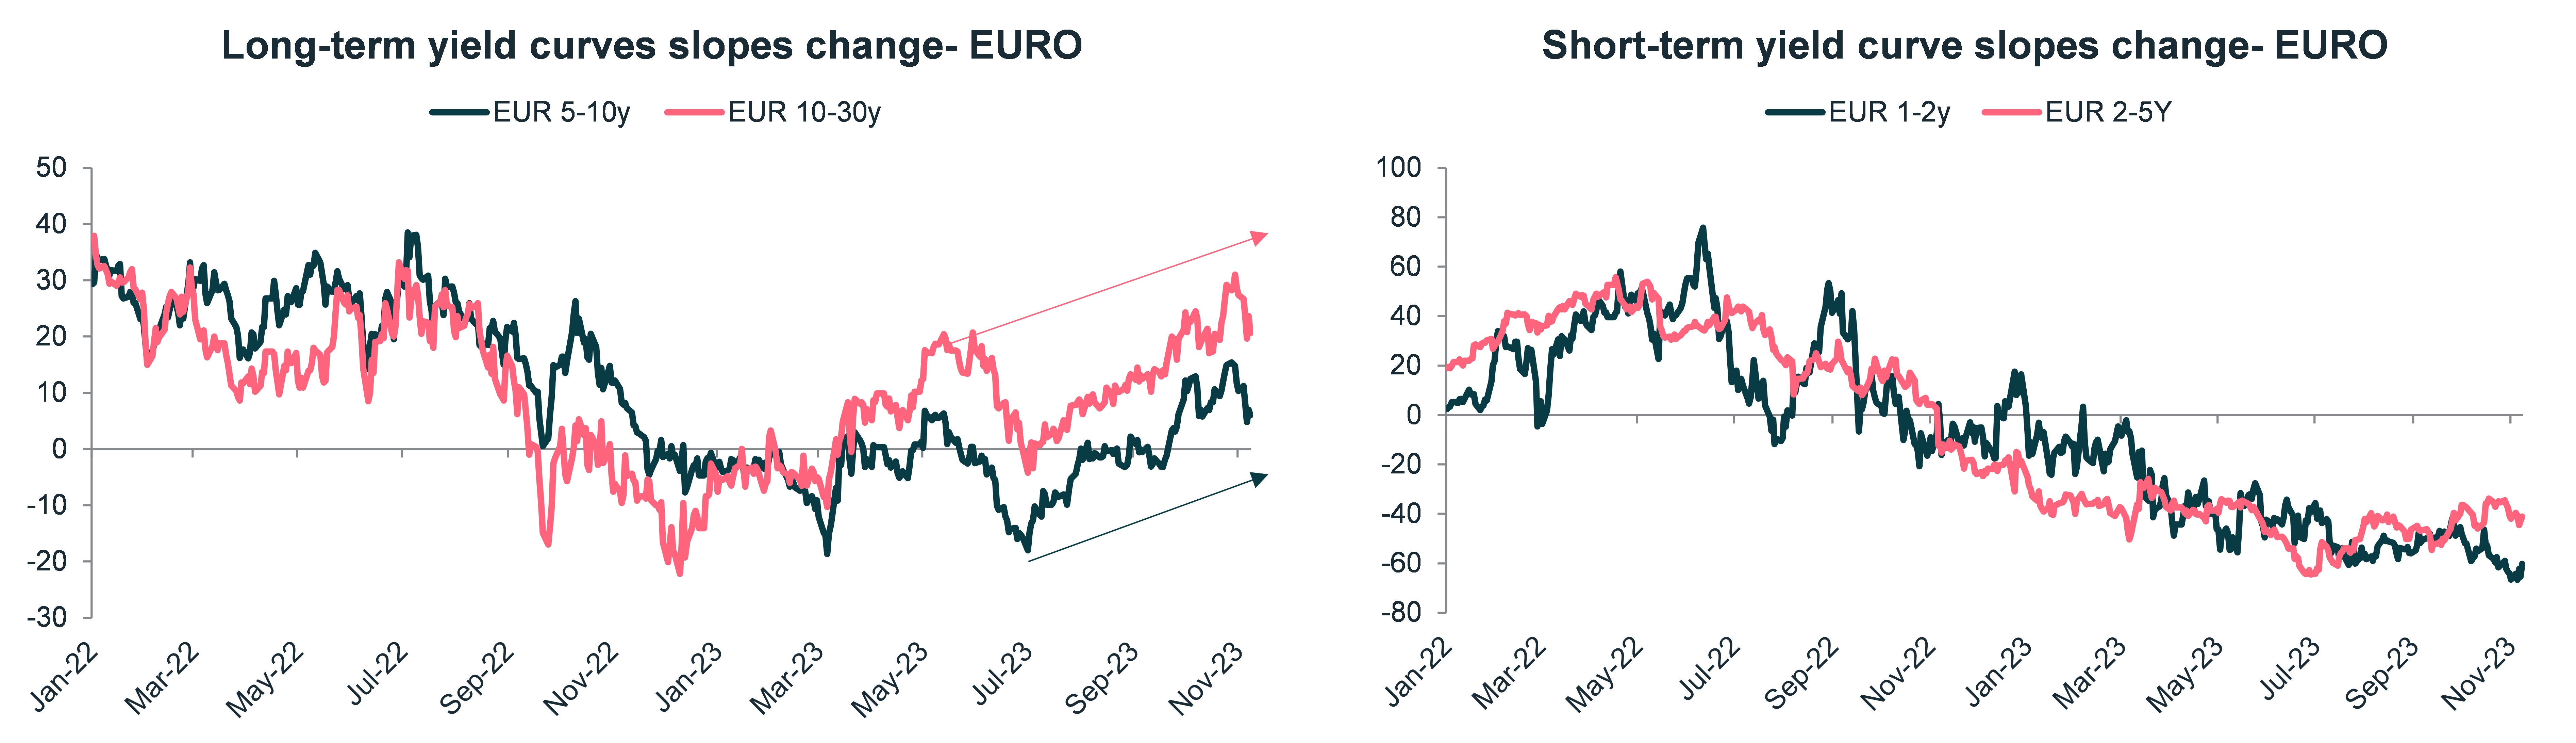 long-and-short-term-yield-curves-slopes-change-euro